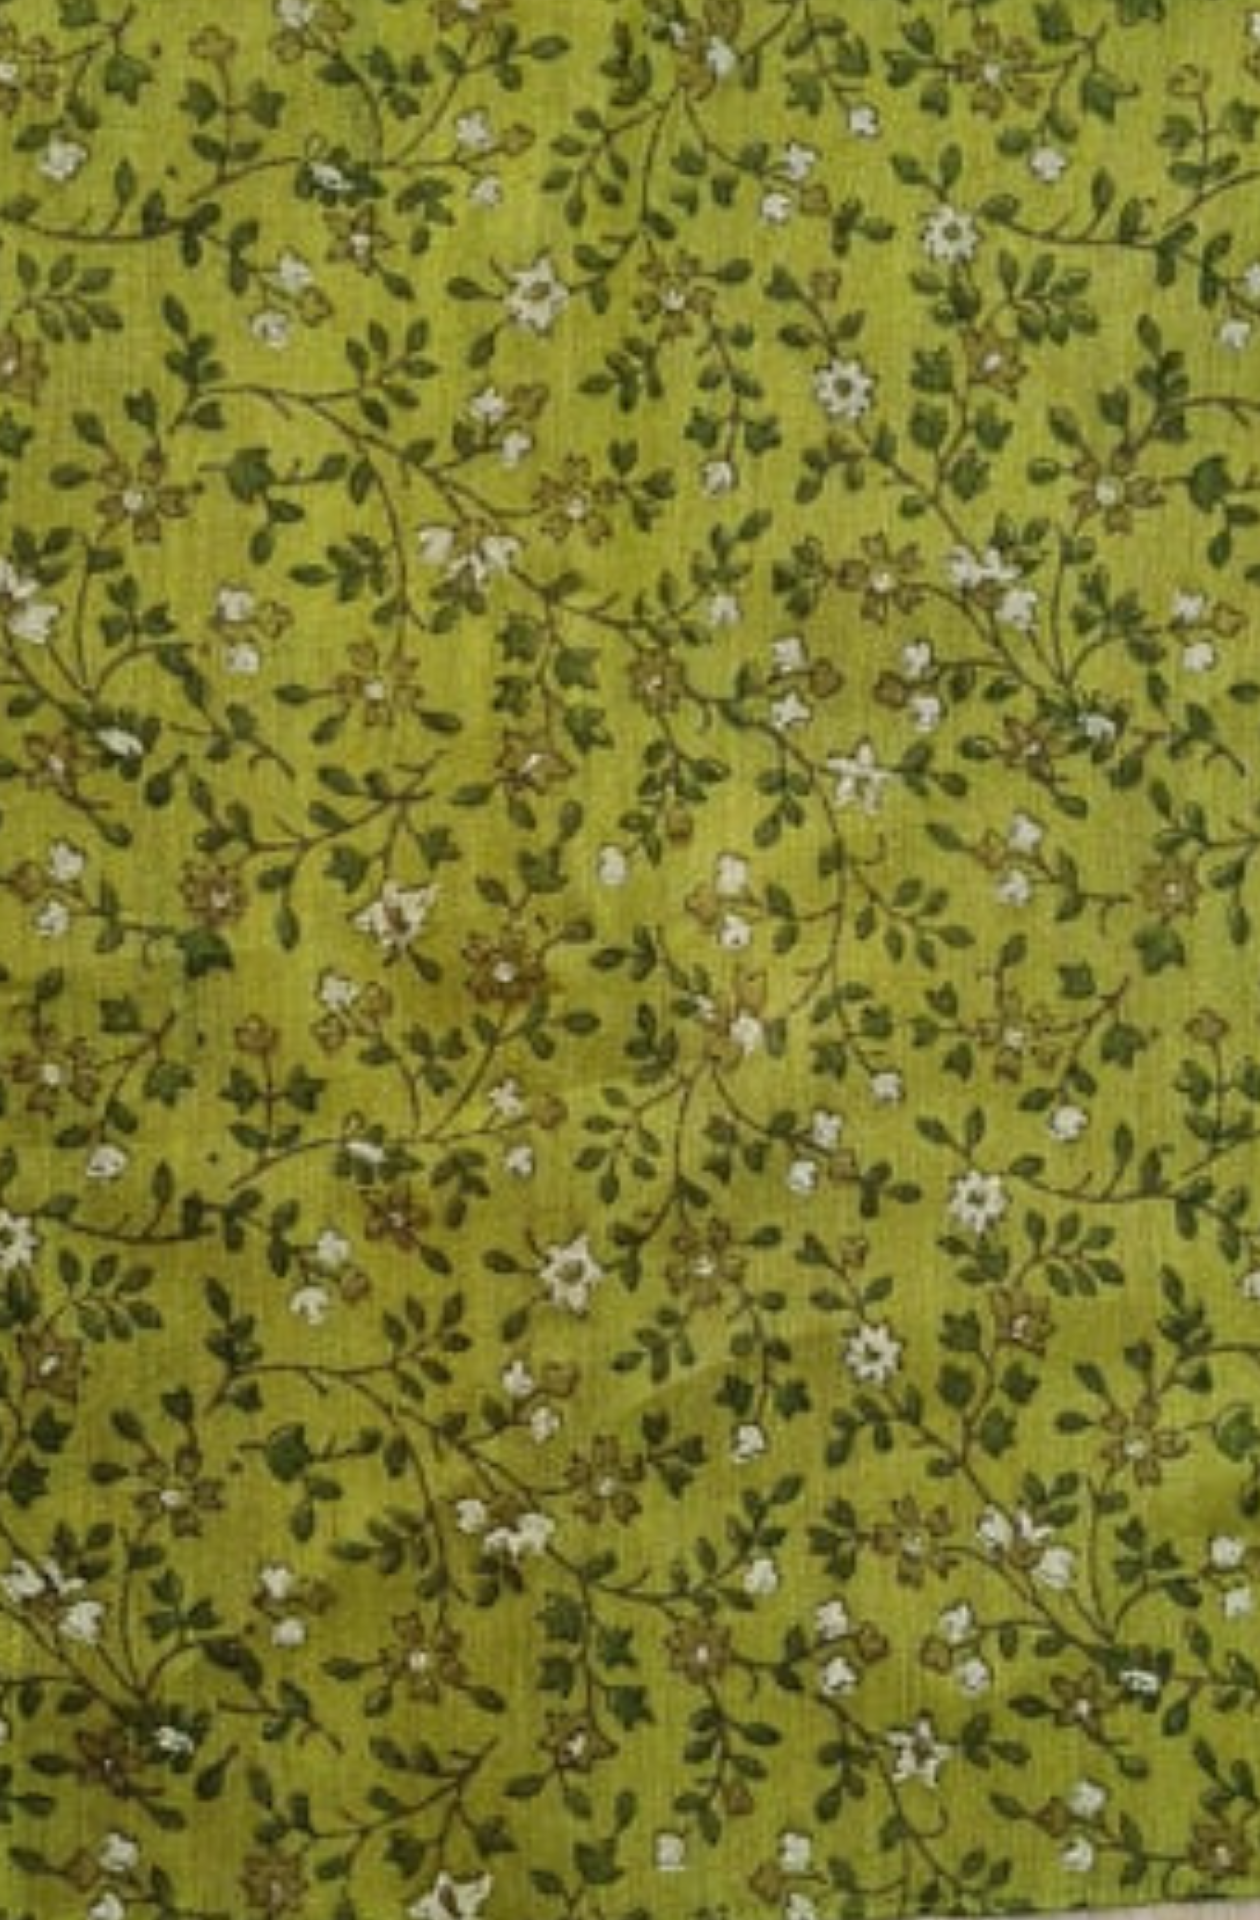 An olive green silk pocket square with a complimentary white and deeper green floral pattern